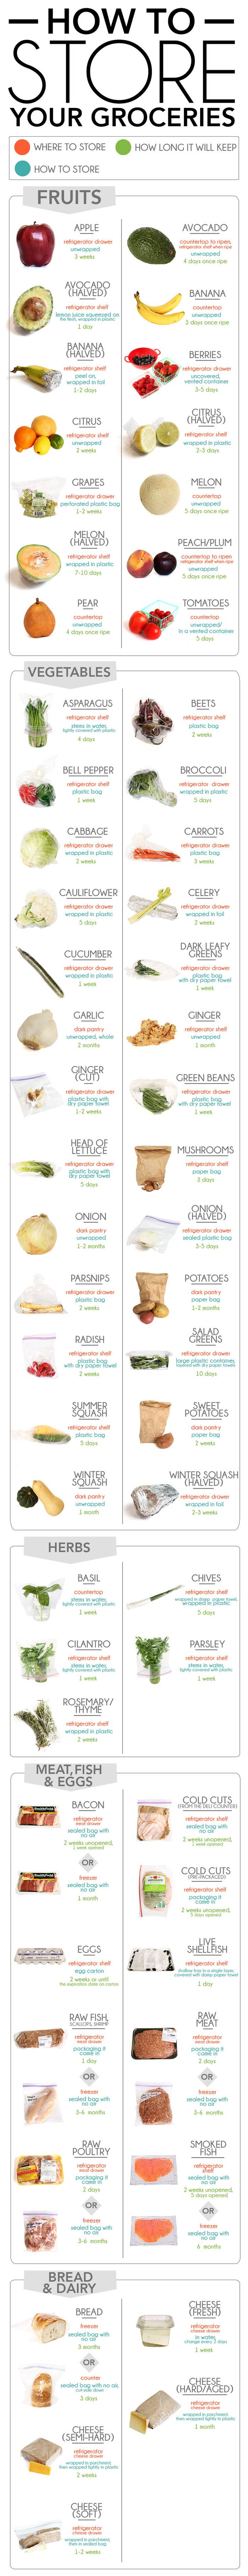 Storage/Shelf Life of Produce | Diagrams For Easier Healthy Eating